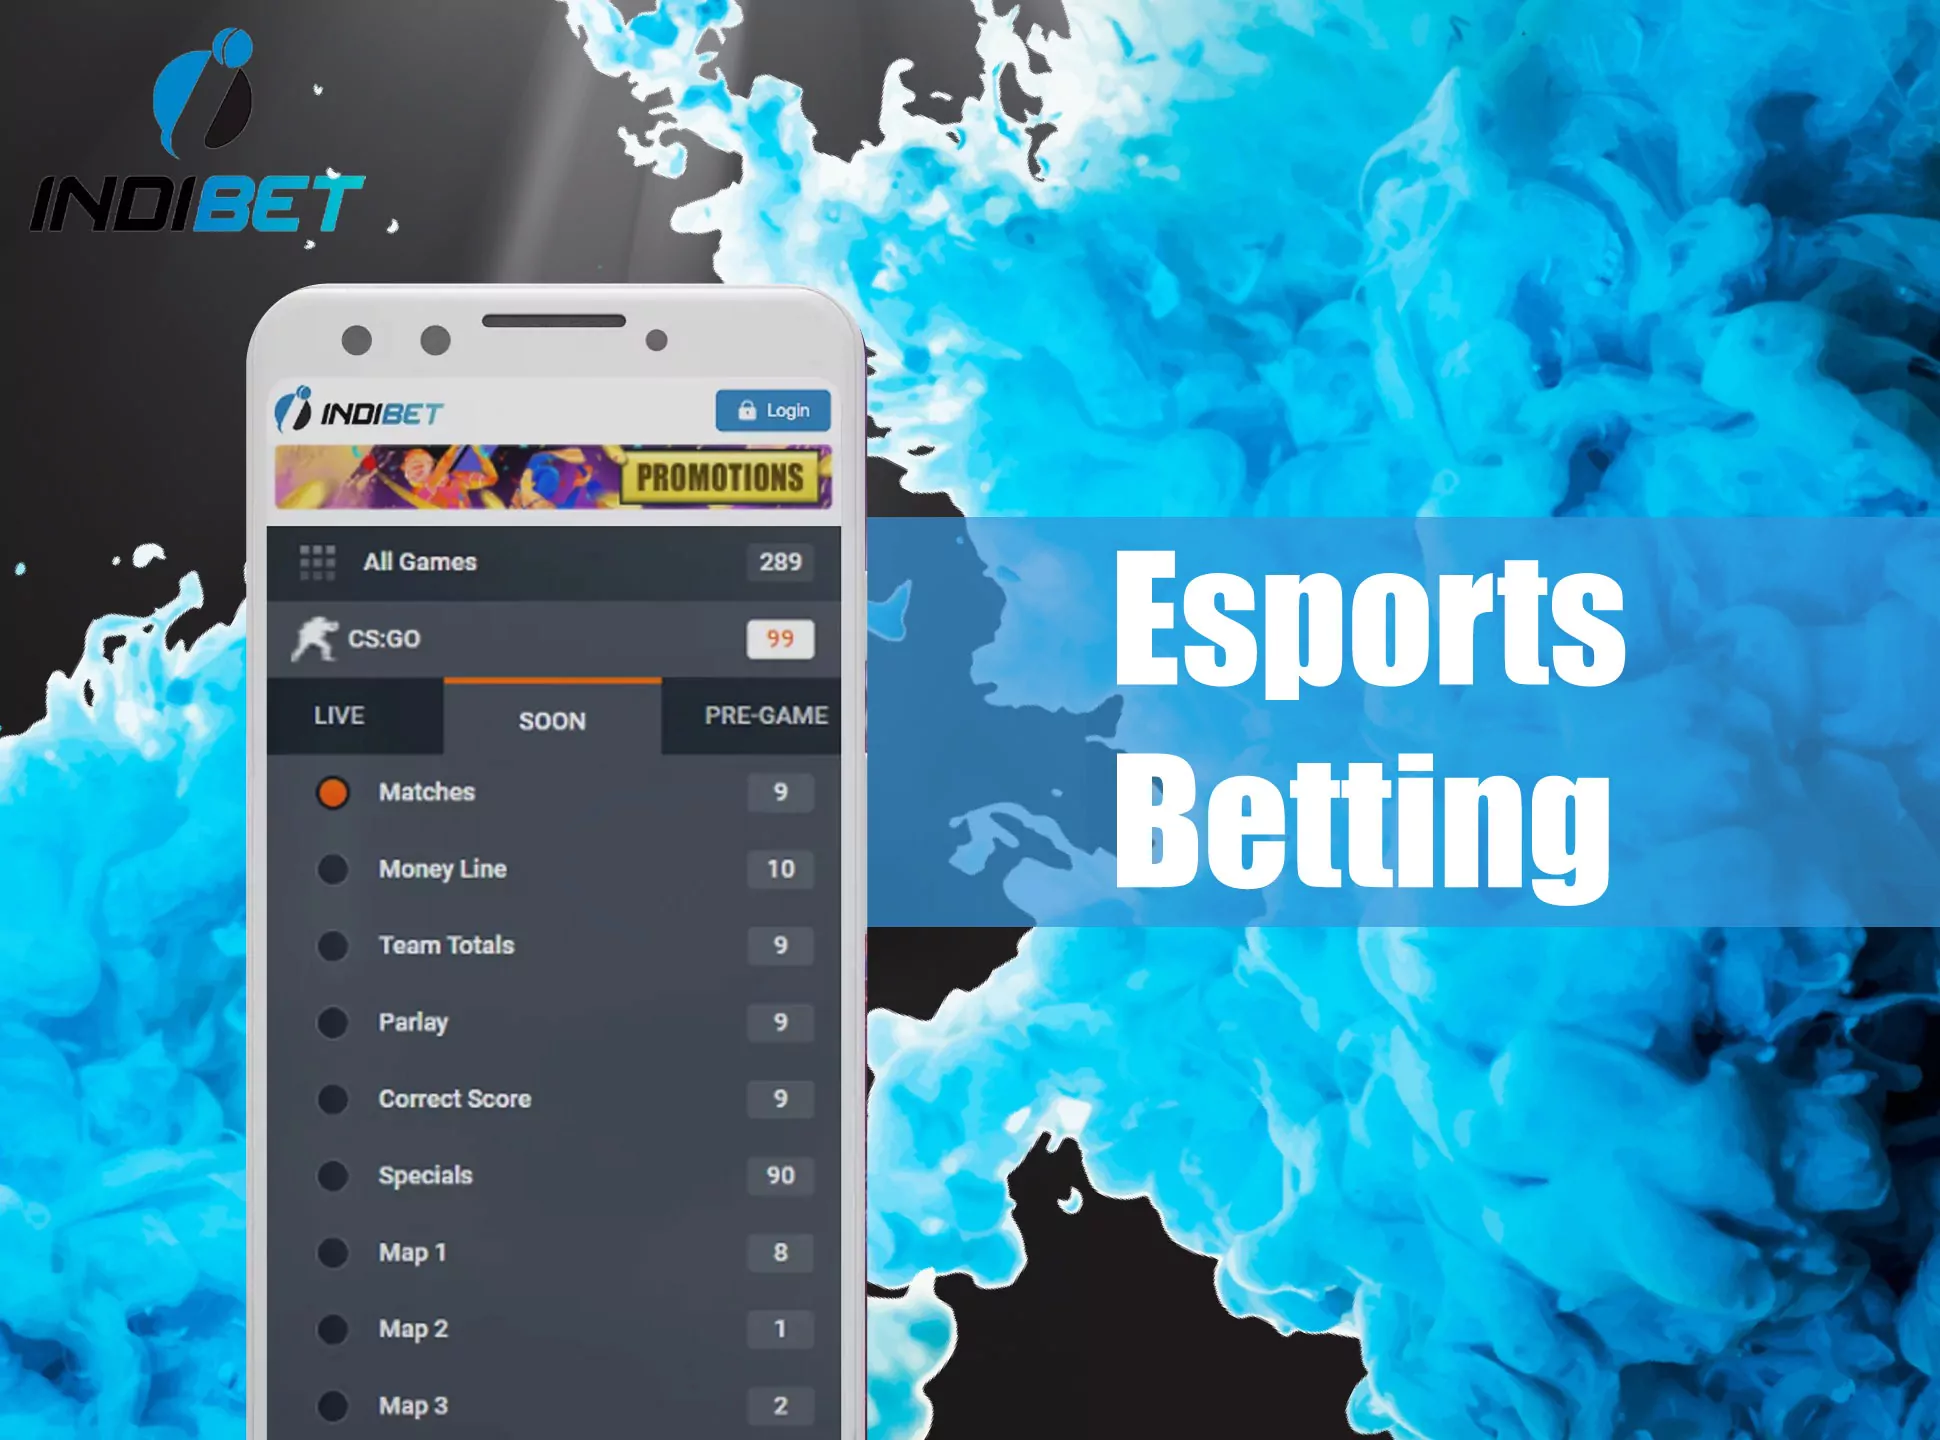 Bet on your favourite esports teams.